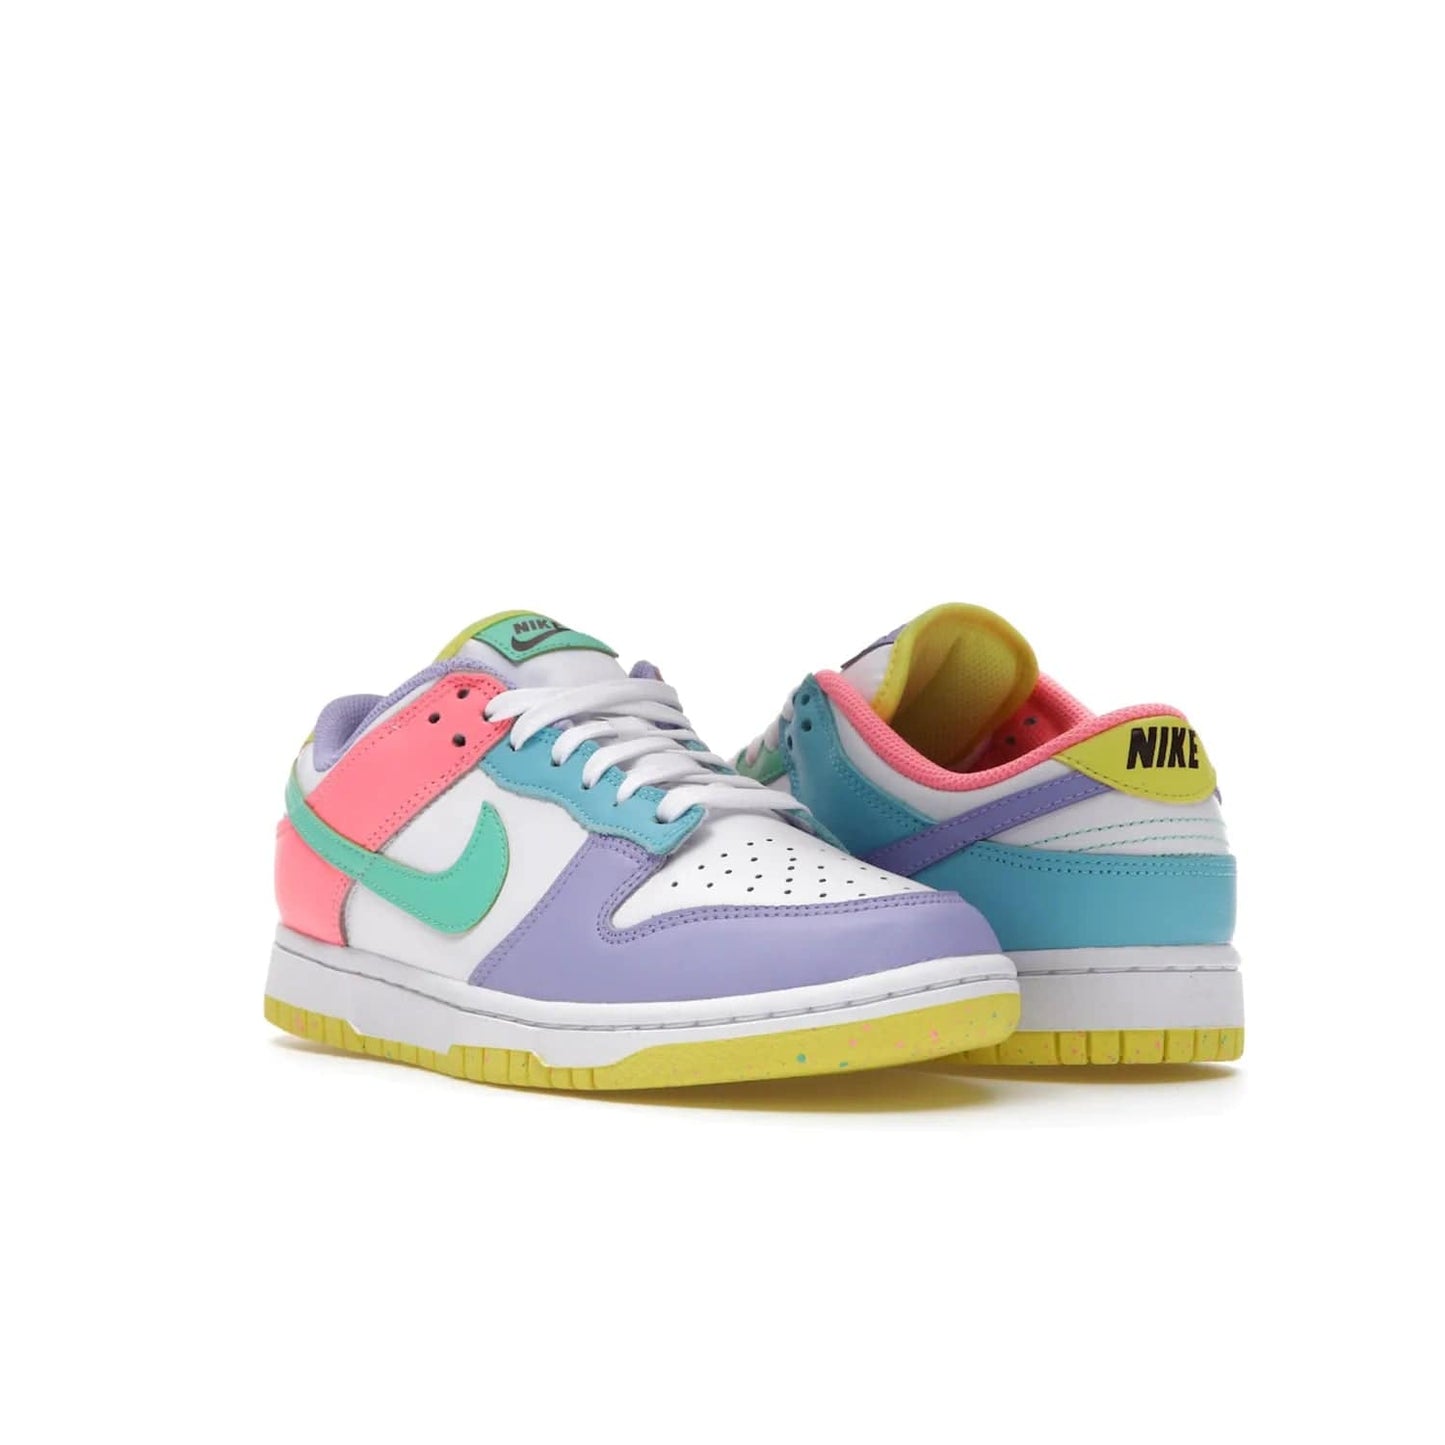 Nike Dunk Low SE Easter Candy (Women's) - Image 6 - Only at www.BallersClubKickz.com - UP
The Nike Dunk Low SE Easter Candy (Women's) brings a stylish touch to any outfit with its white leather upper, colorful accents, and multicolor speckle detailing. Shop now before they're gone.